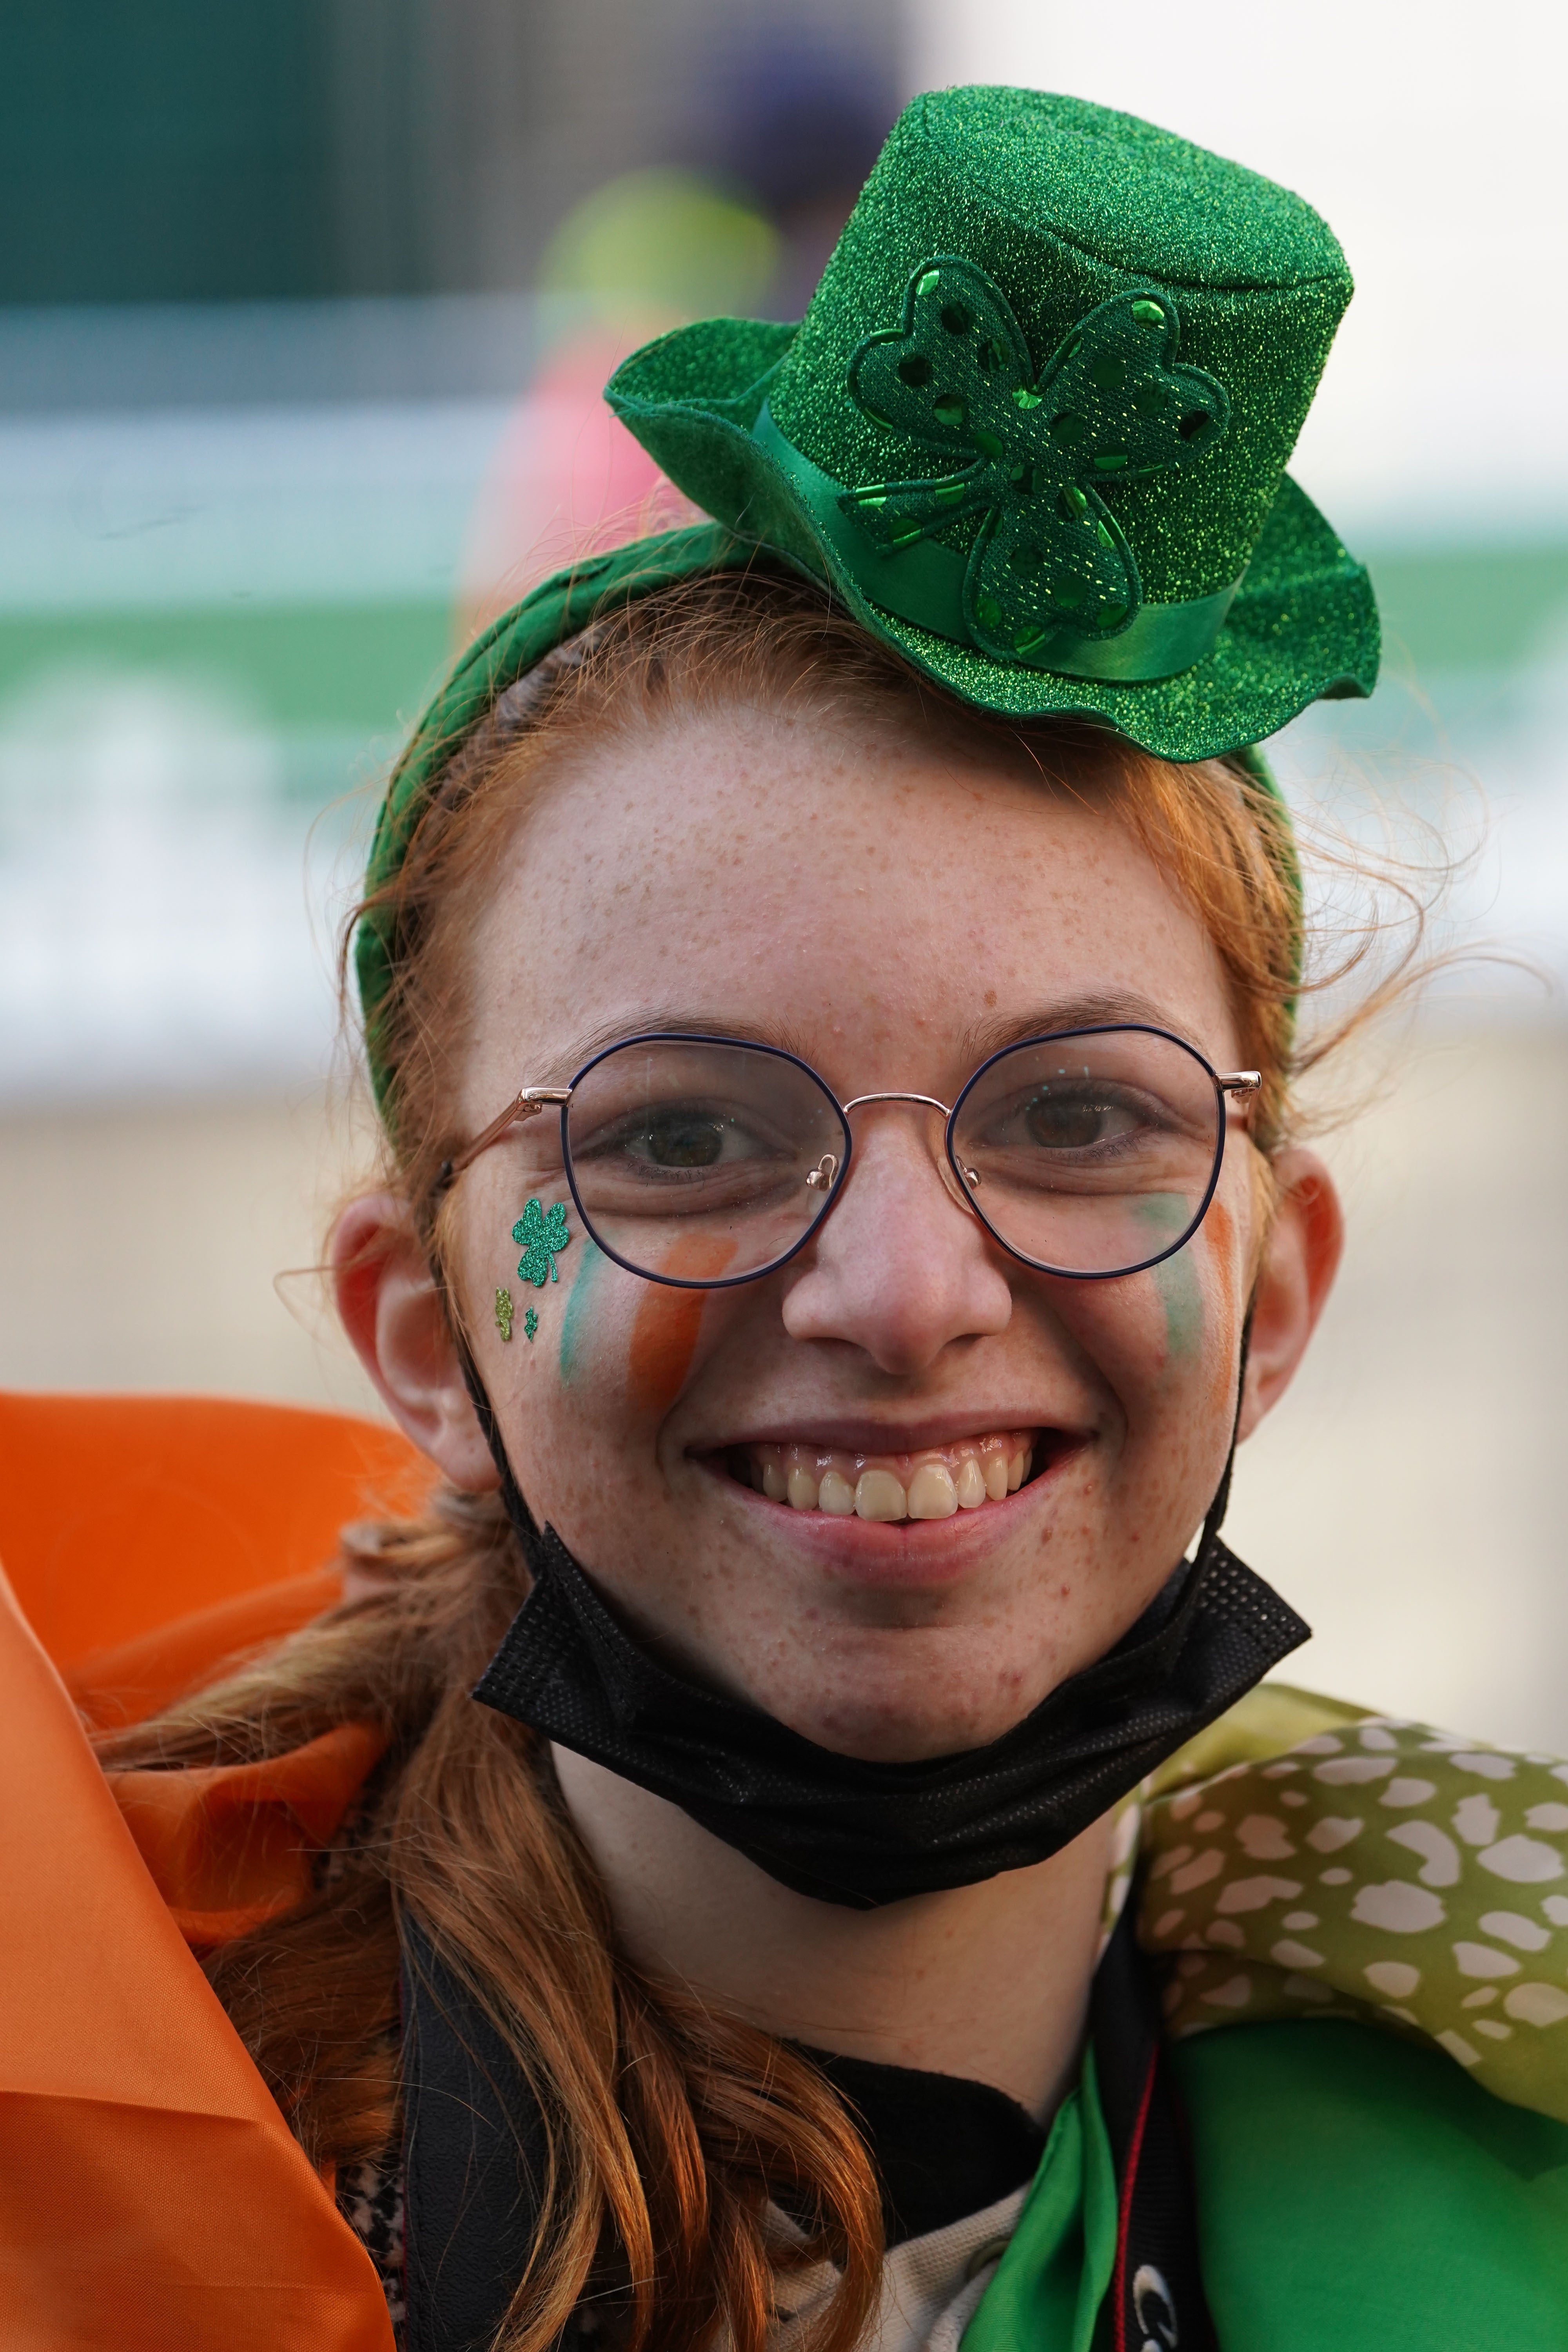 A woman arrives for the St Patrick’s Day Parade in Dublin (Brian Lawless/PA)